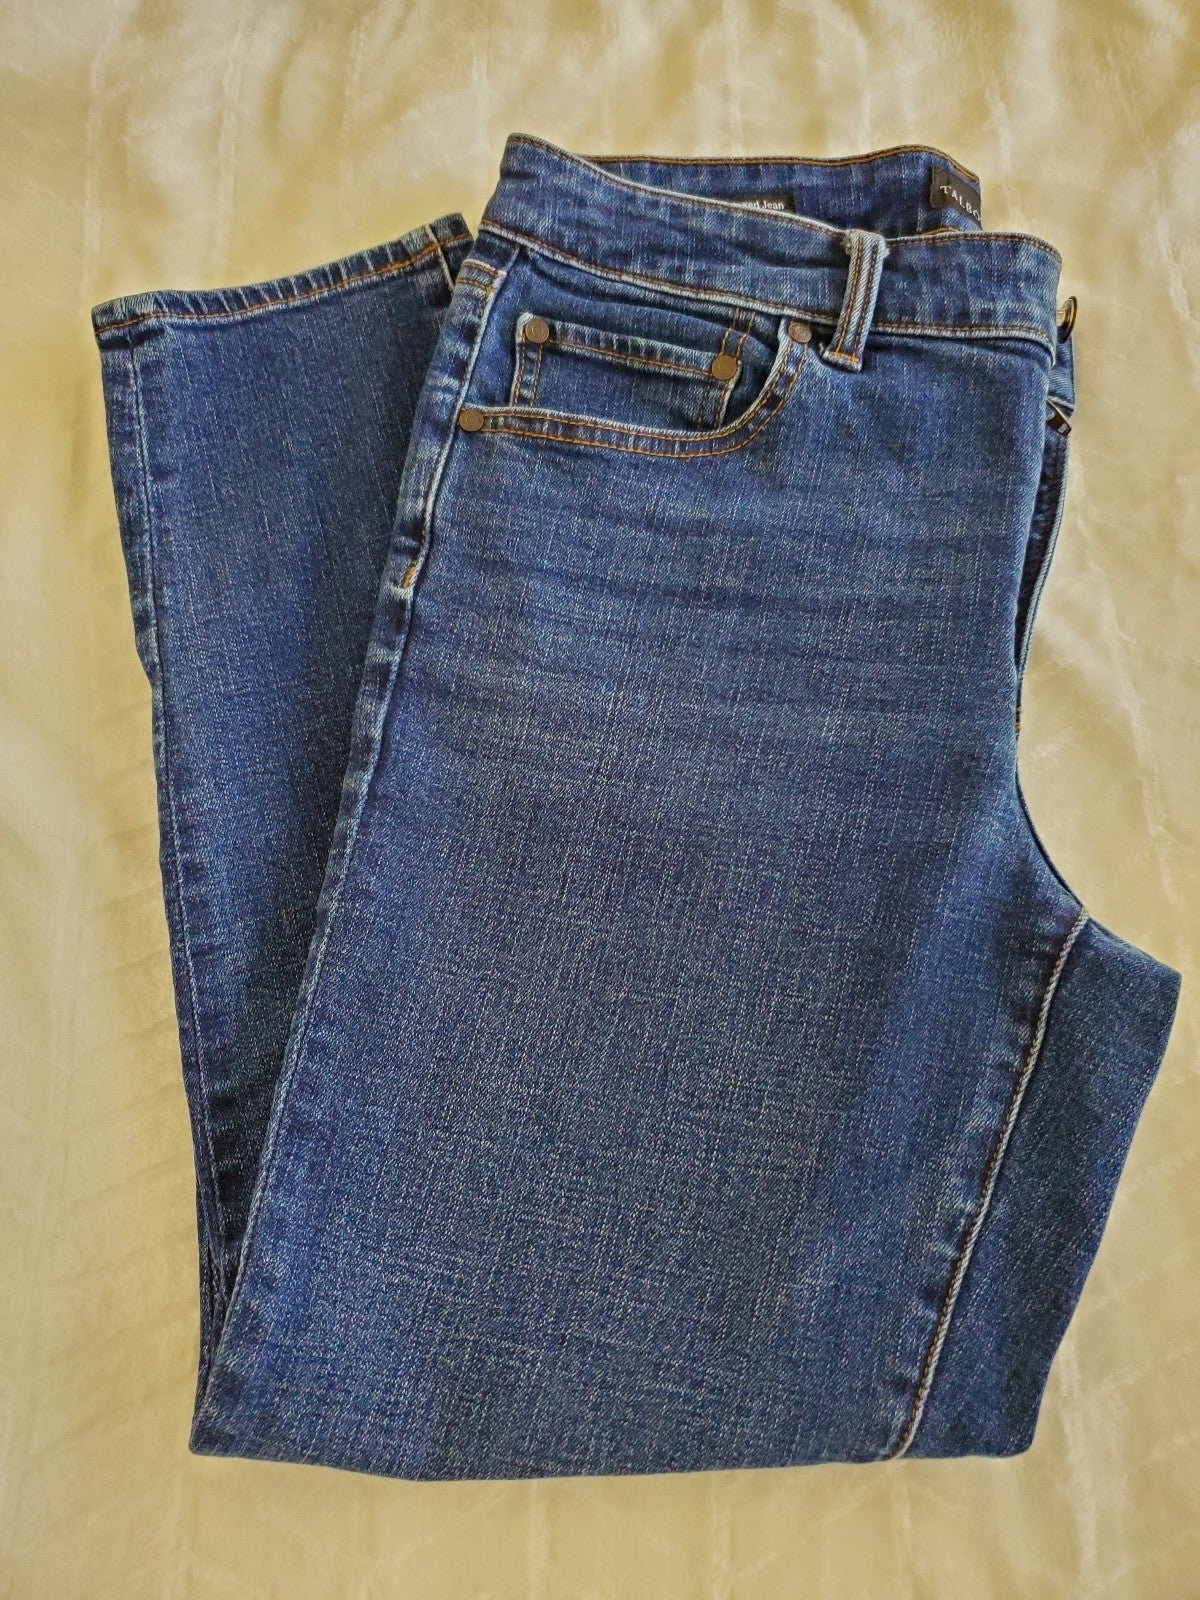 Exclusive Talbots 6 Petite Relaxed Jeans JgfIfzklb no t